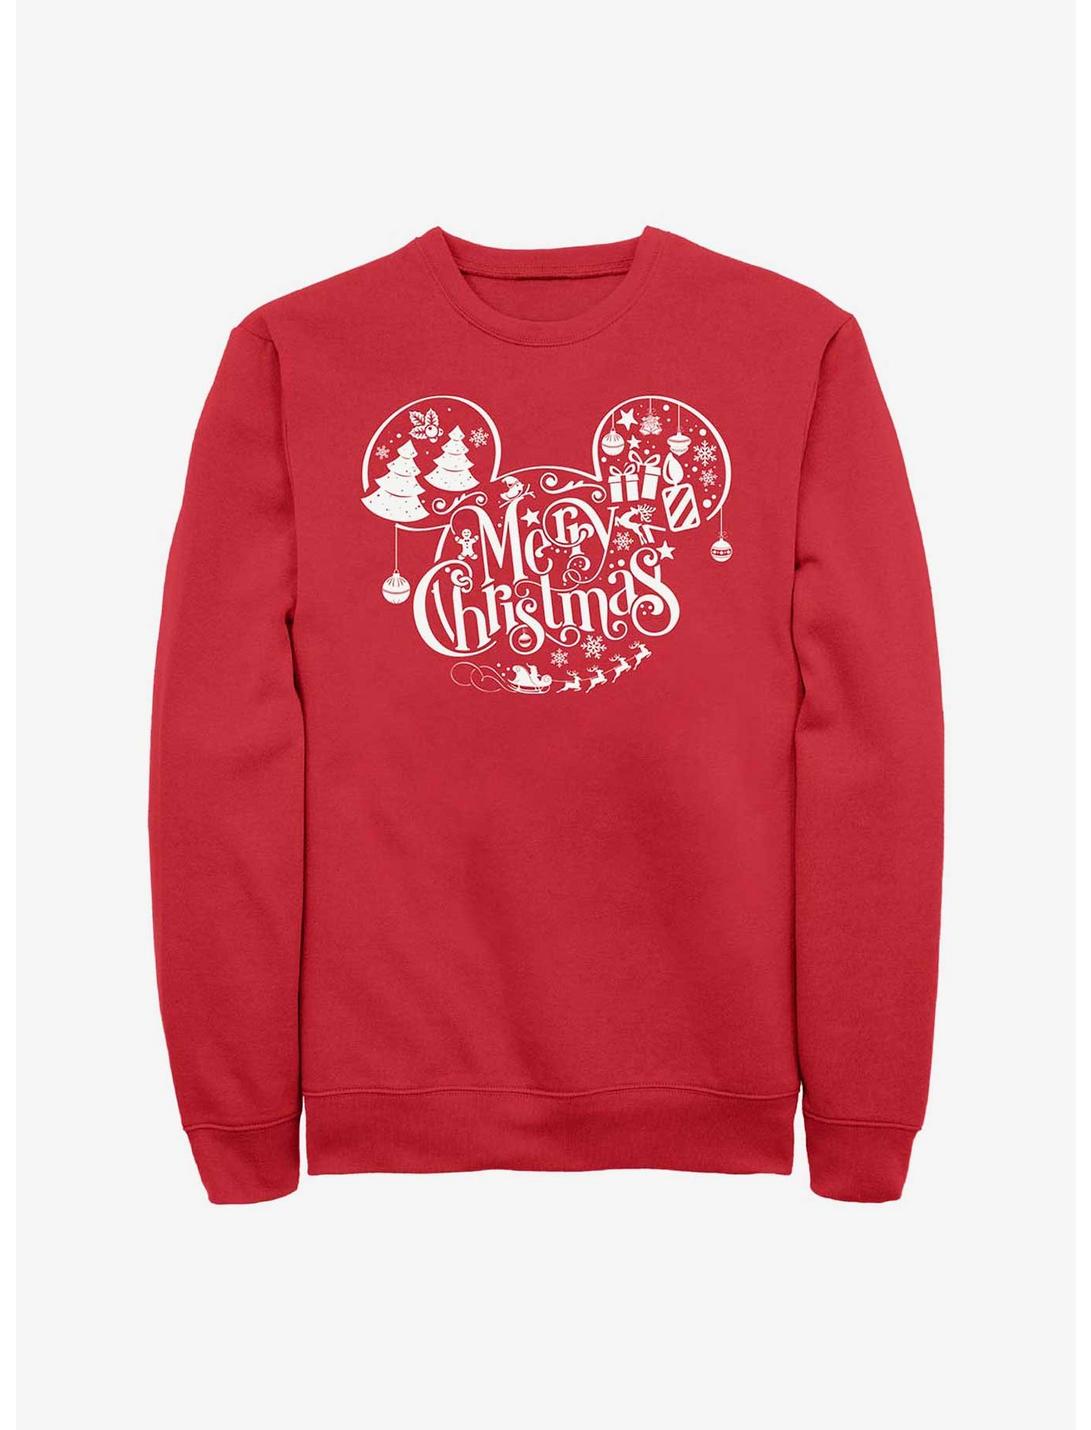 Disney Mickey Mouse Holiday Ears Crew Sweatshirt, RED, hi-res